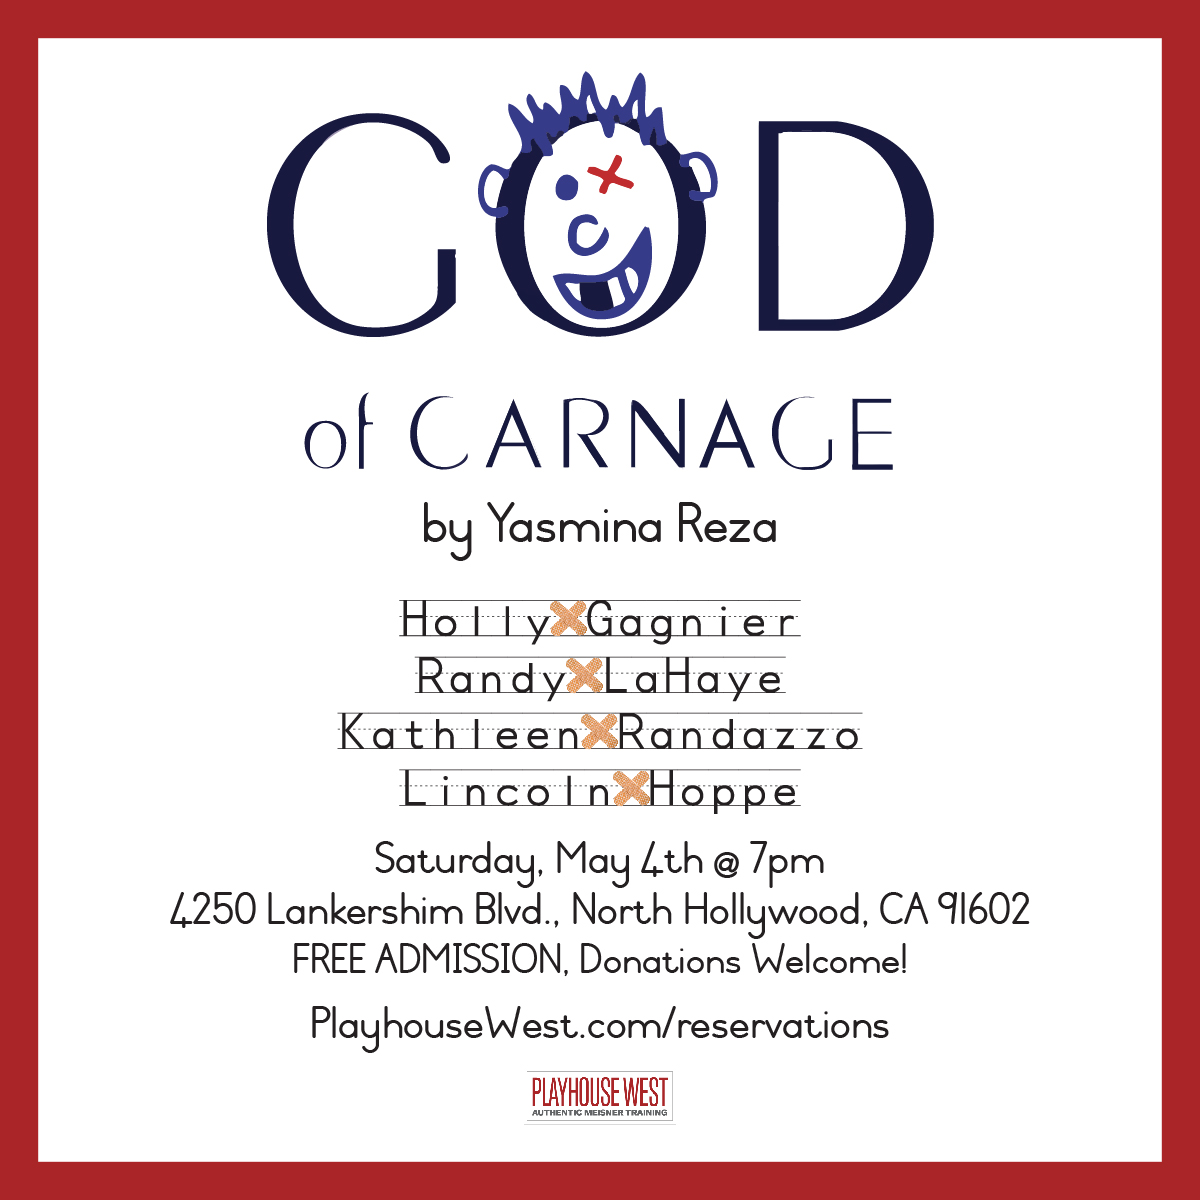 Need a good laugh? 😀 The 'God of Carnage' gang is back this Saturday, 5/4 @ 7pm! Admission is FREE, but donations are welcome.

Get your tickets now at l8r.it/qBE9 🎟️